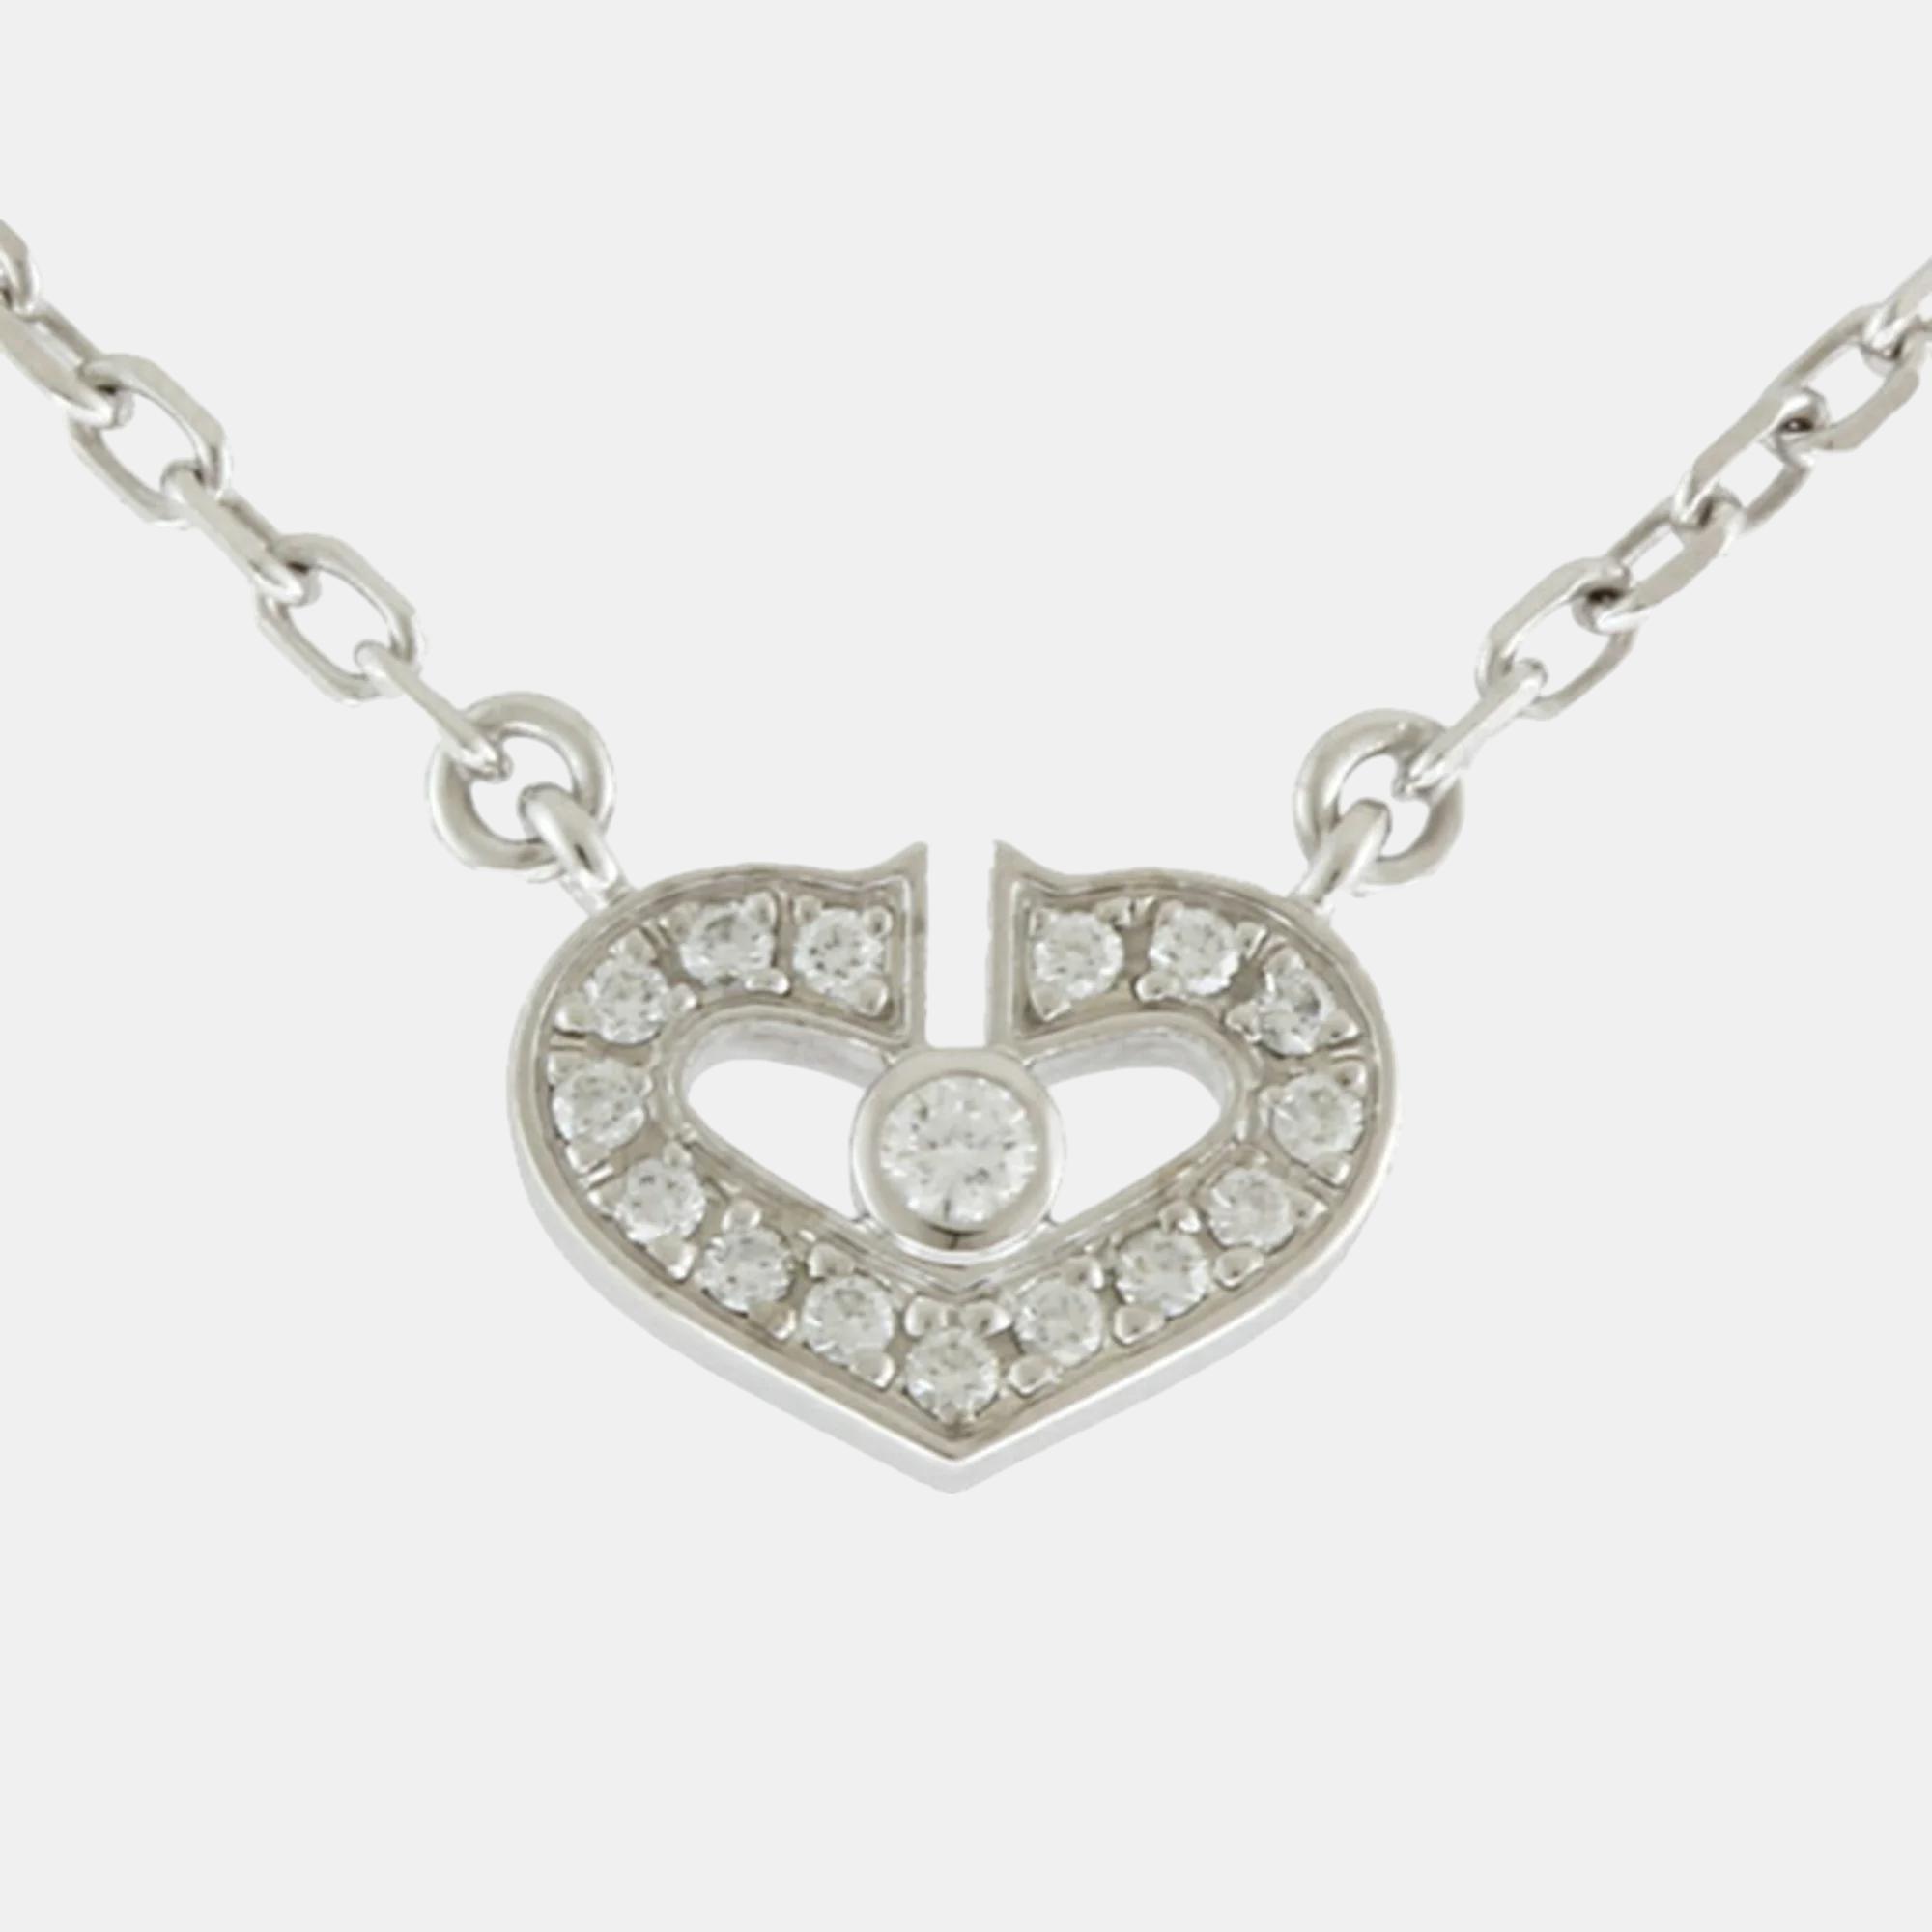 Cartier 18k white gold and diamond heart c pendant necklace